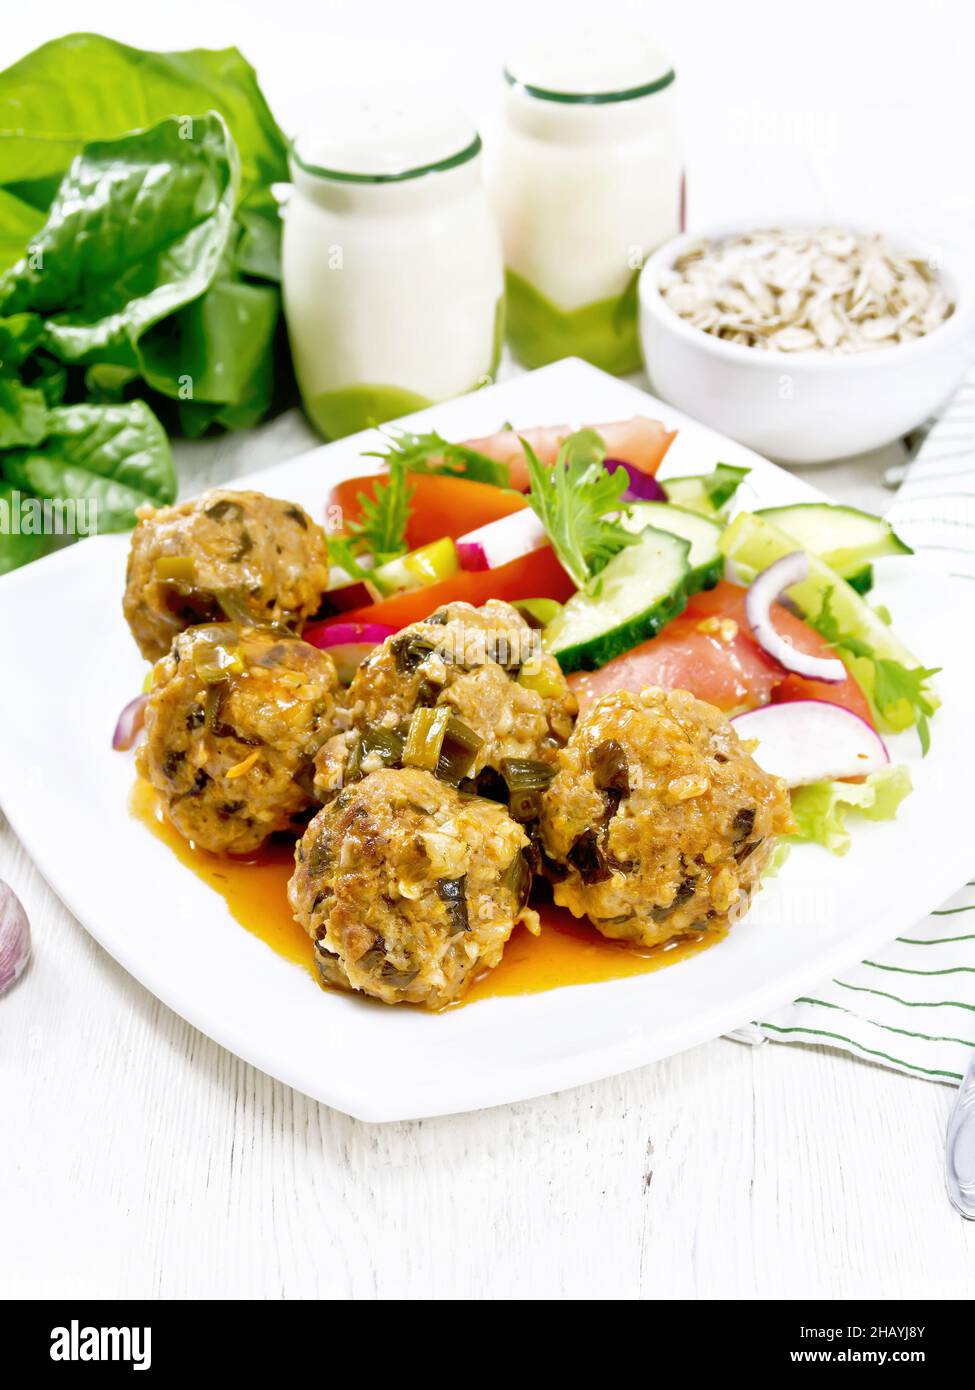 Minced meatballs with spinach, oatmeal and green onions in tomato sauce, vegetable salad in a plate, napkin on a wooden board background Stock Photo